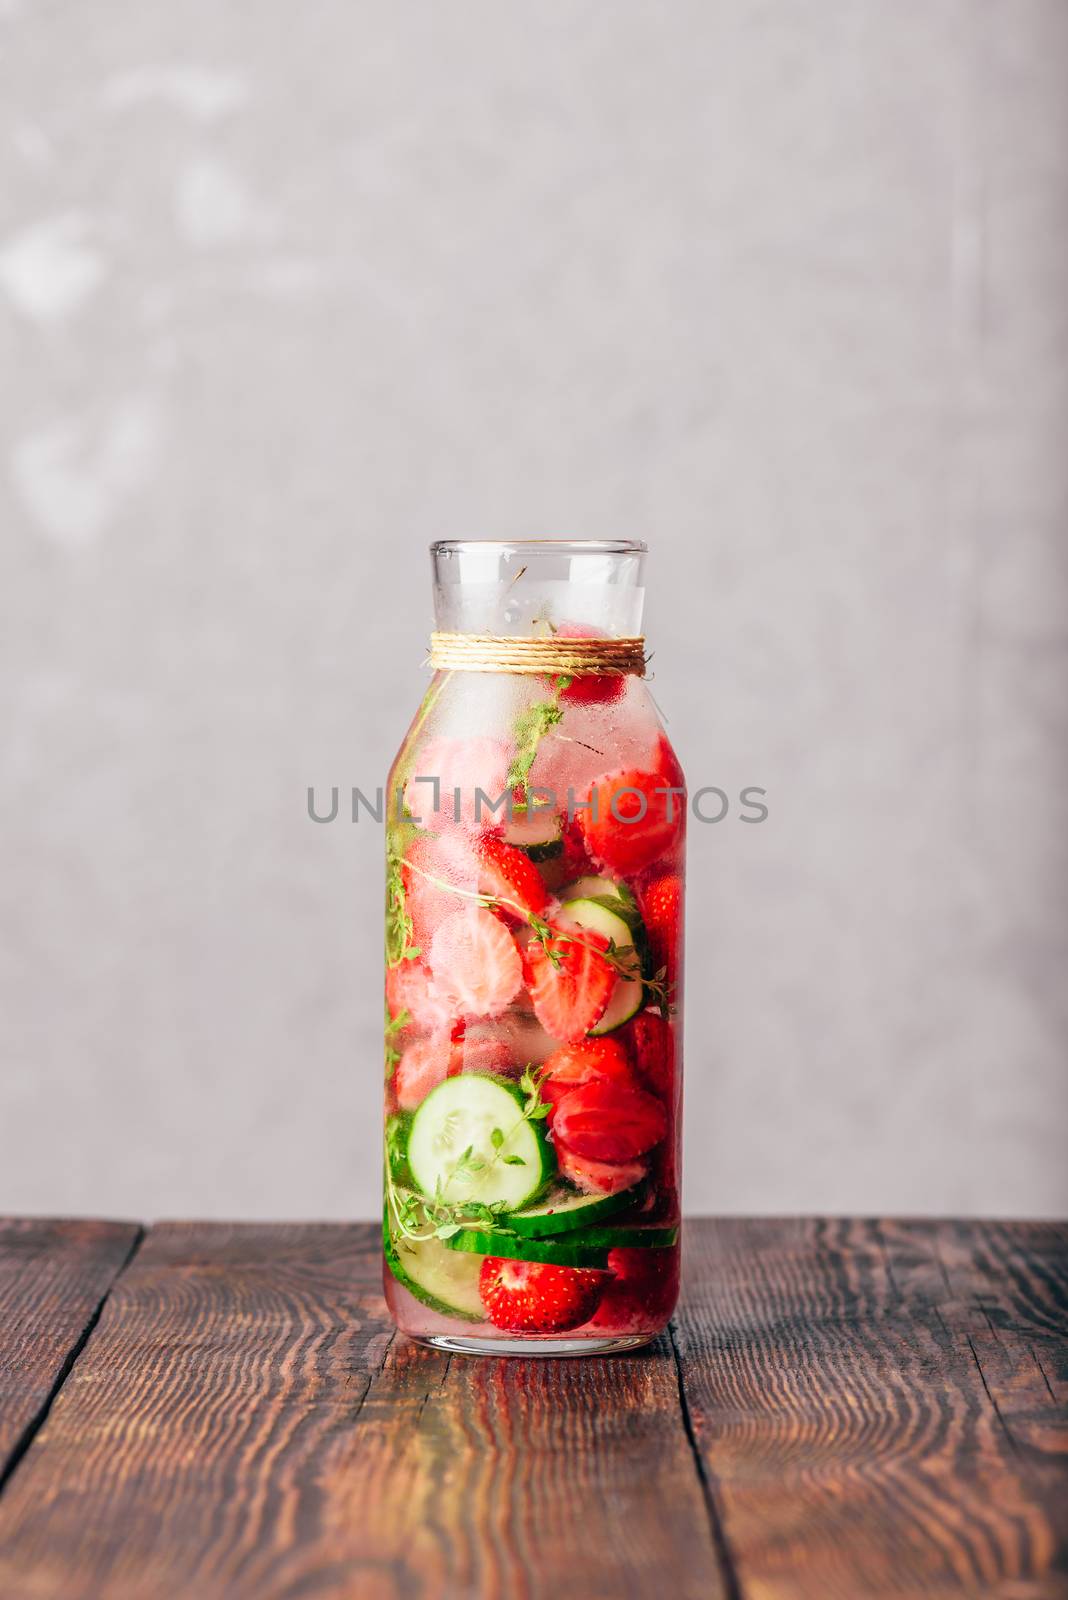 Bottle of Infused Water with Fresh Strawberry, Sliced Cucumber and Springs of Thyme. Copy Space and Vertical Orientation.